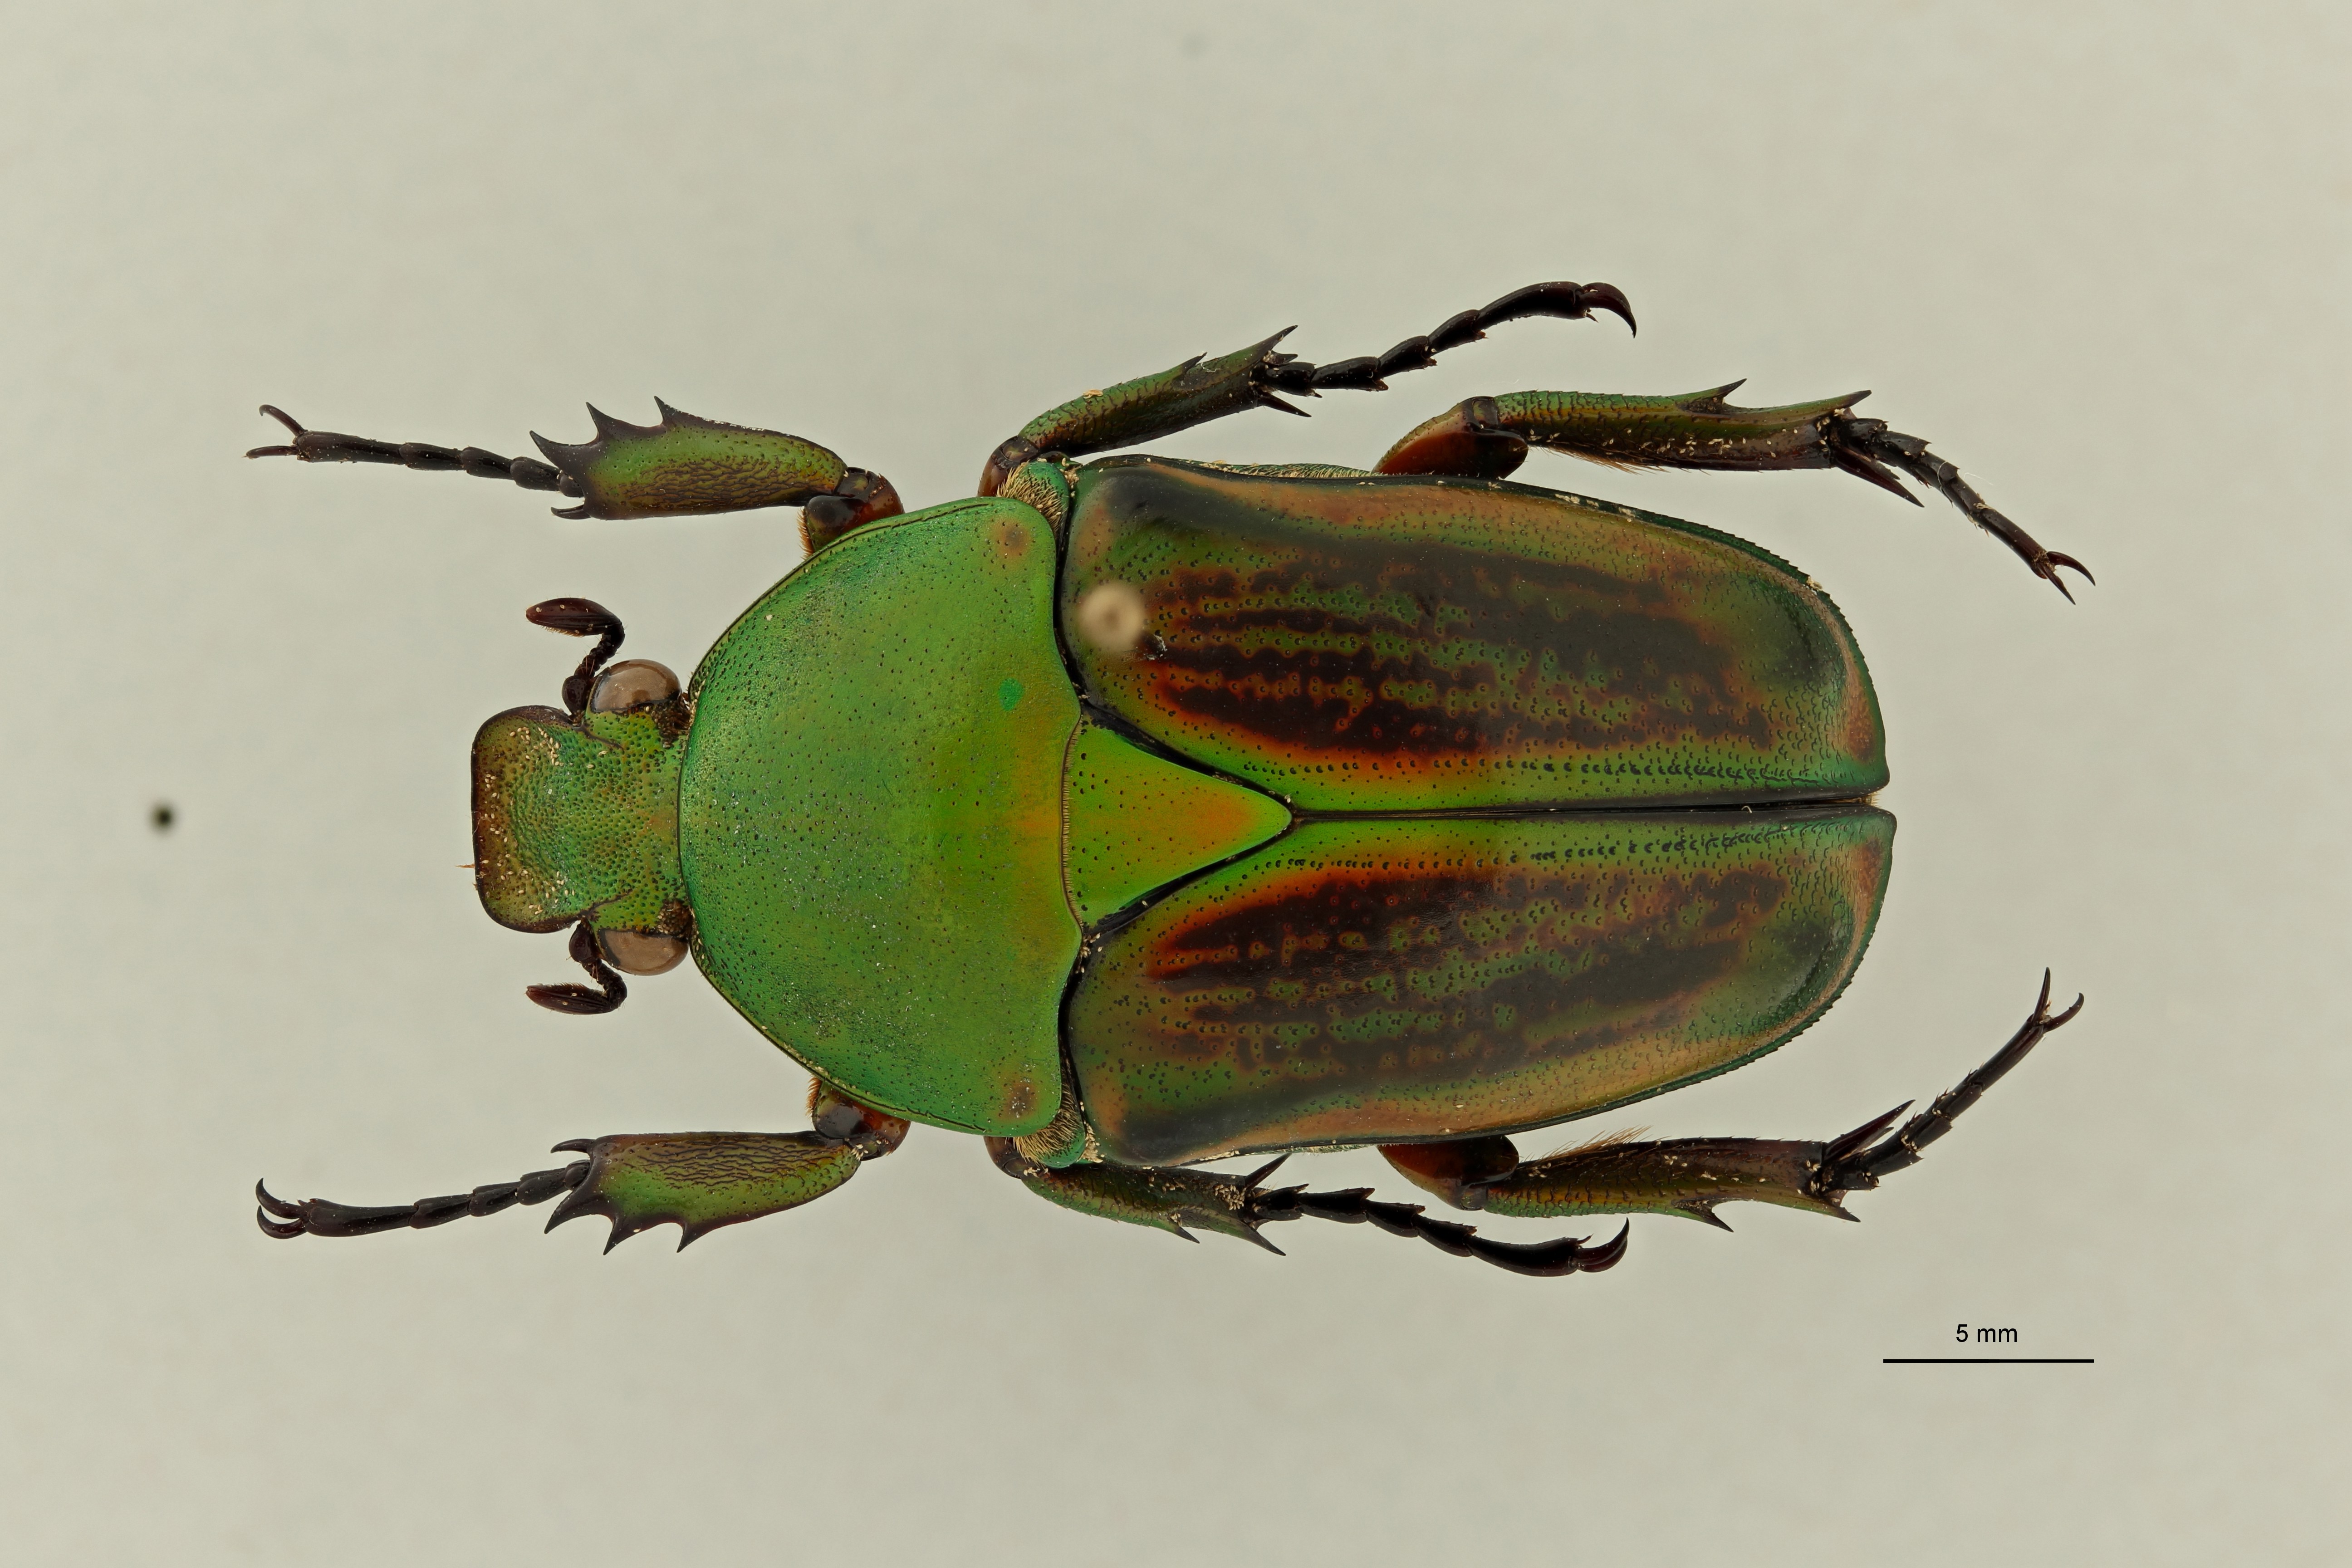 Eudicella woermanni alexisi at D ZS PMax Scaled.jpeg